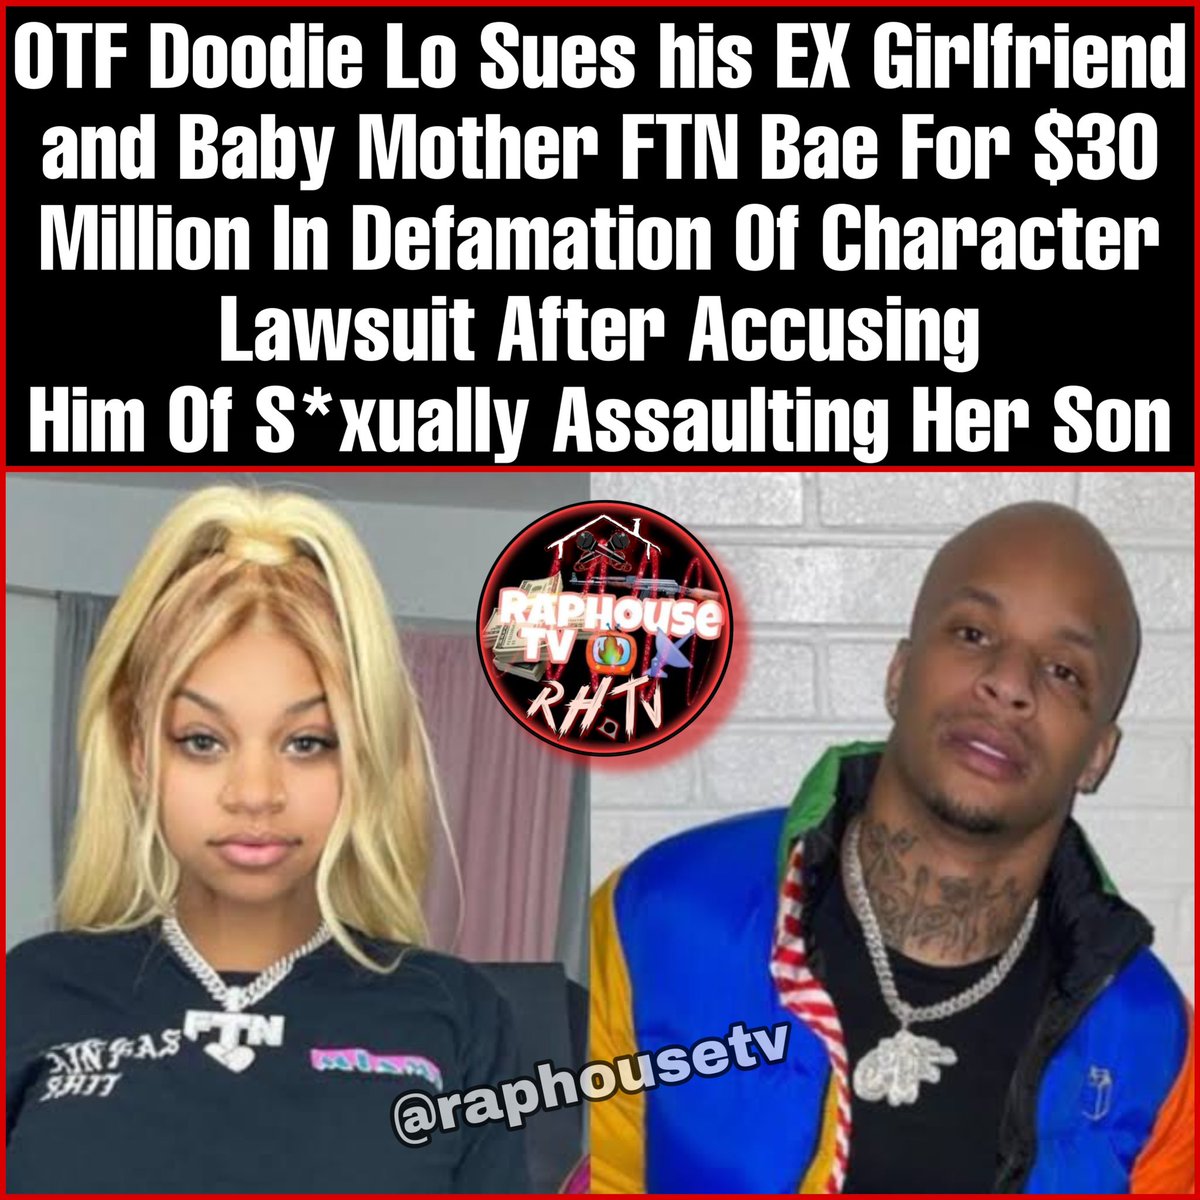 OTF Doodie Lo Sues his EX Girlfriend and Baby Mother FTN Bae For $30 Million In Defamation Of Character Lawsuit After Accusing Him Of Sexually Assaulting Her Son👀💵